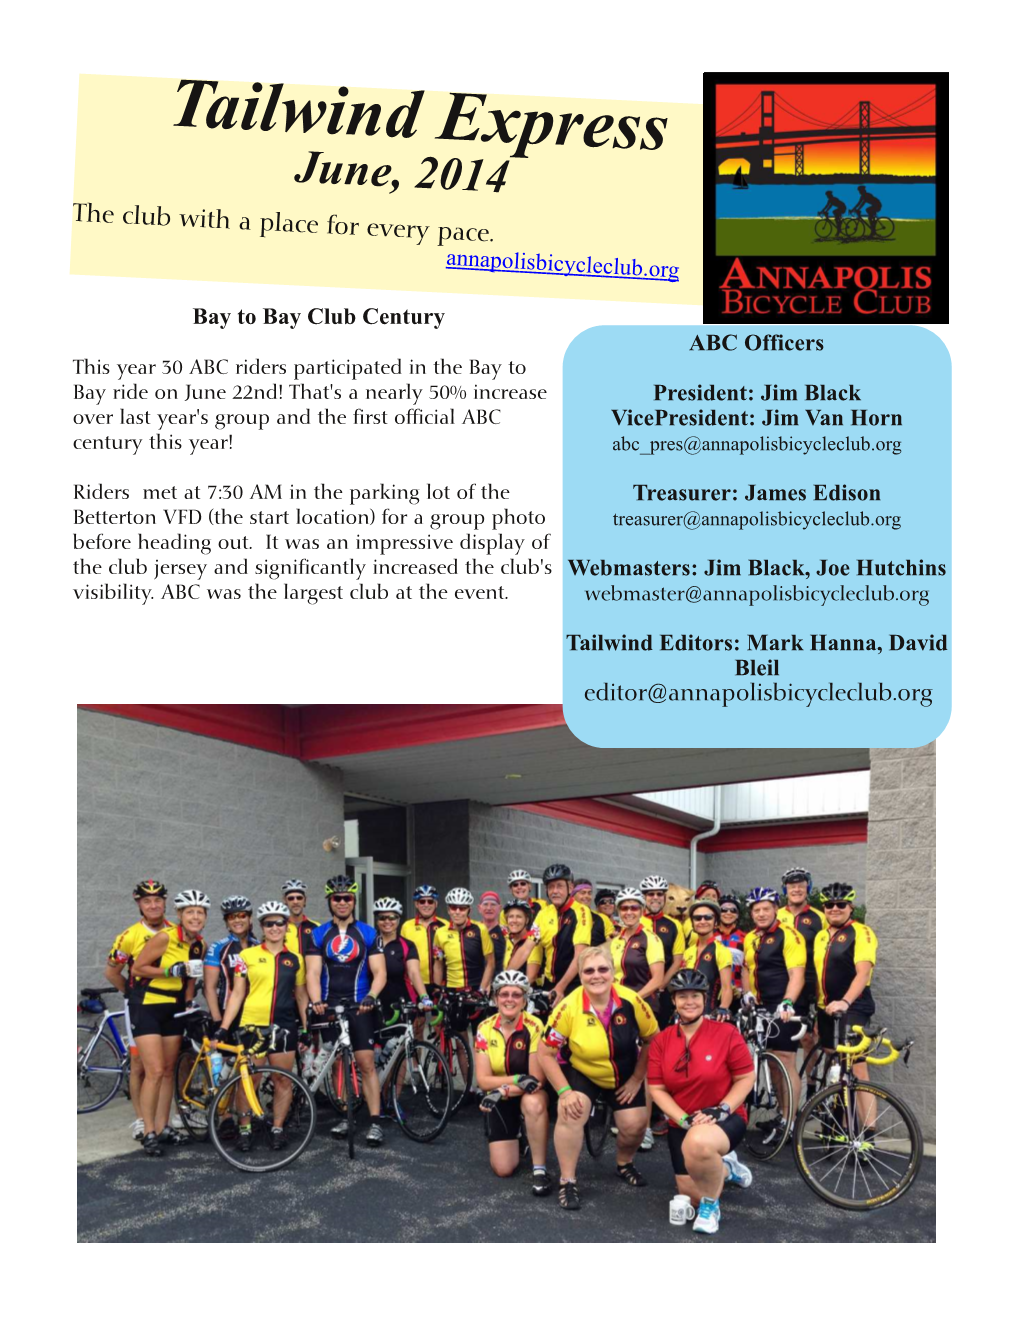 Tailwind Express June, 2014 the Club with a Place for Every Pace